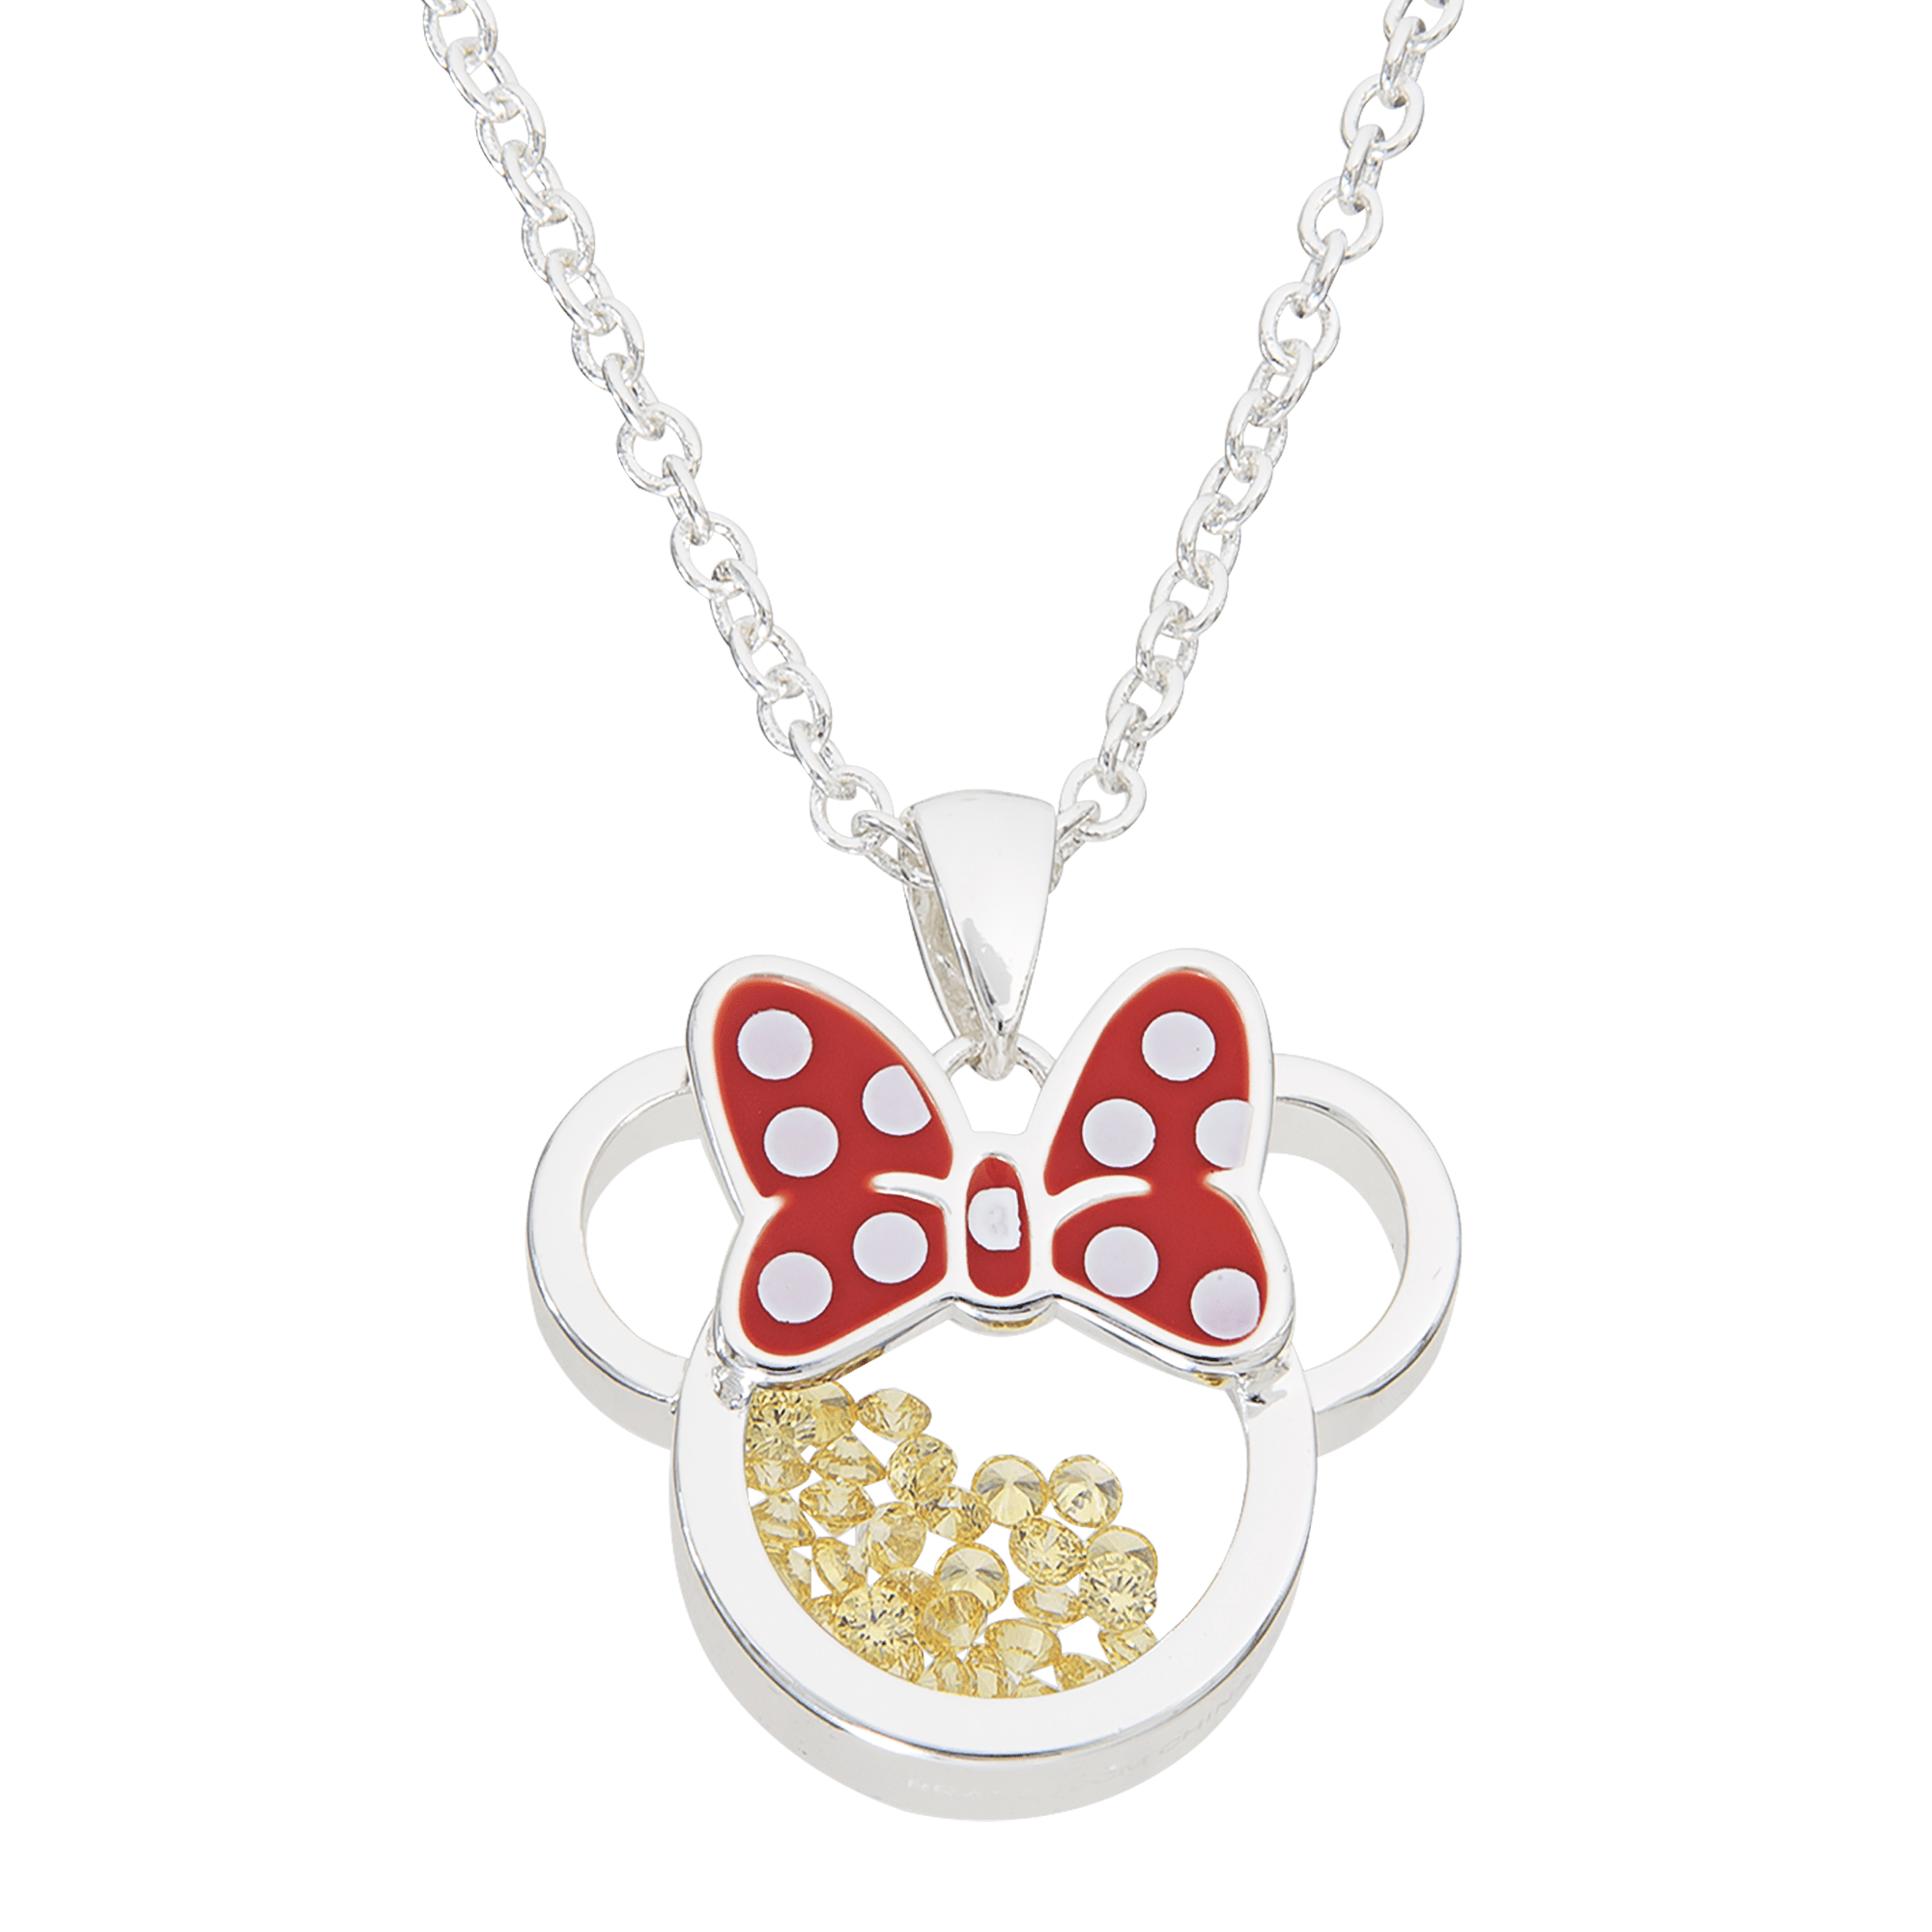 MICKEY MOUSE 18 INCH  NECKLACE STRONG SILVER PLATED  GIFT BOX BIRTHDAY PARTY 